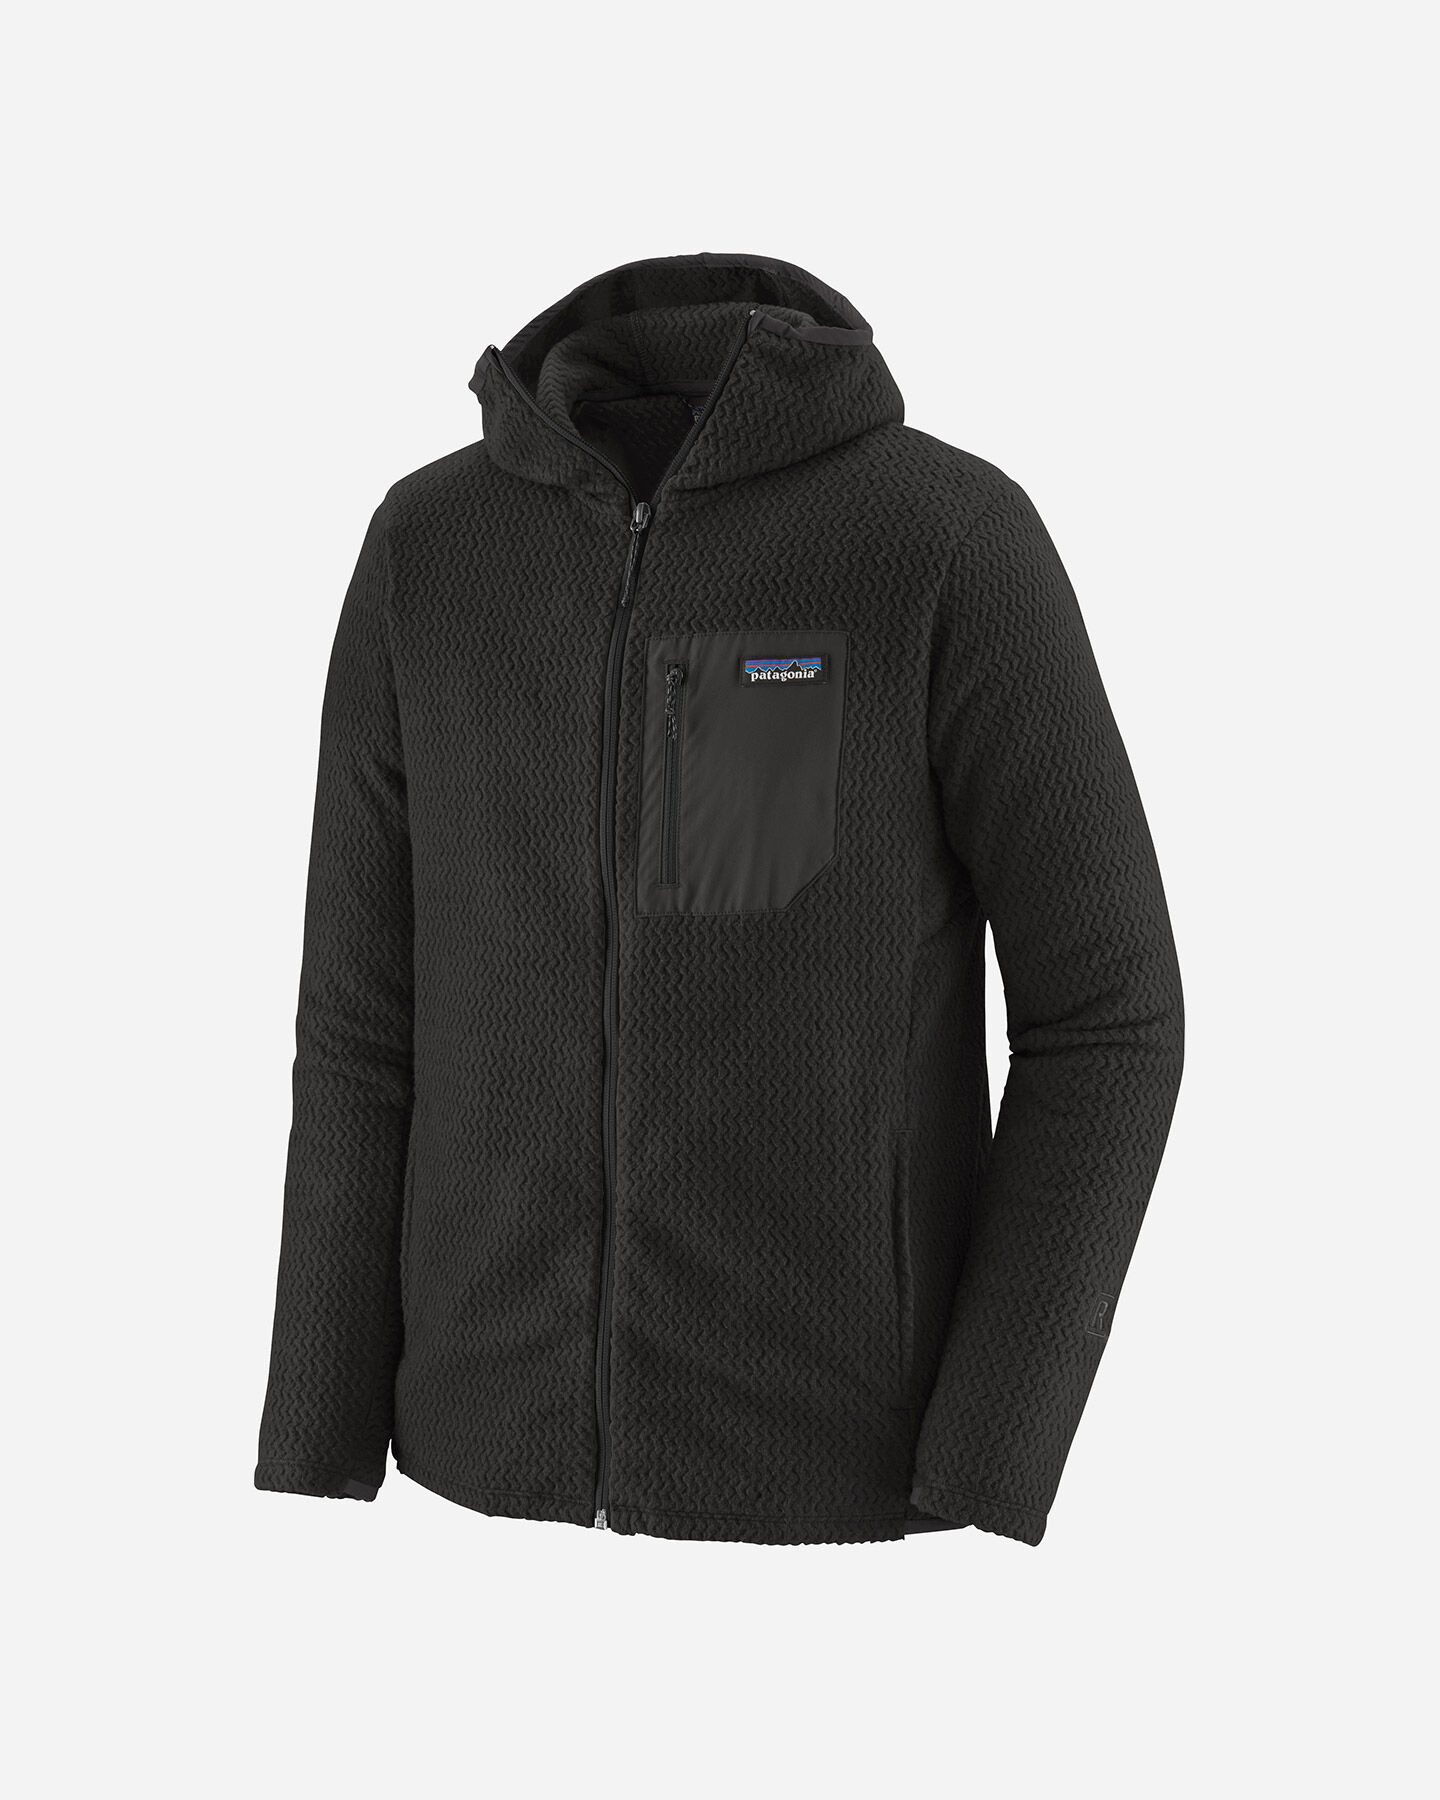  Pile PATAGONIA R1 AIR M S4097097|BLK|S scatto 2